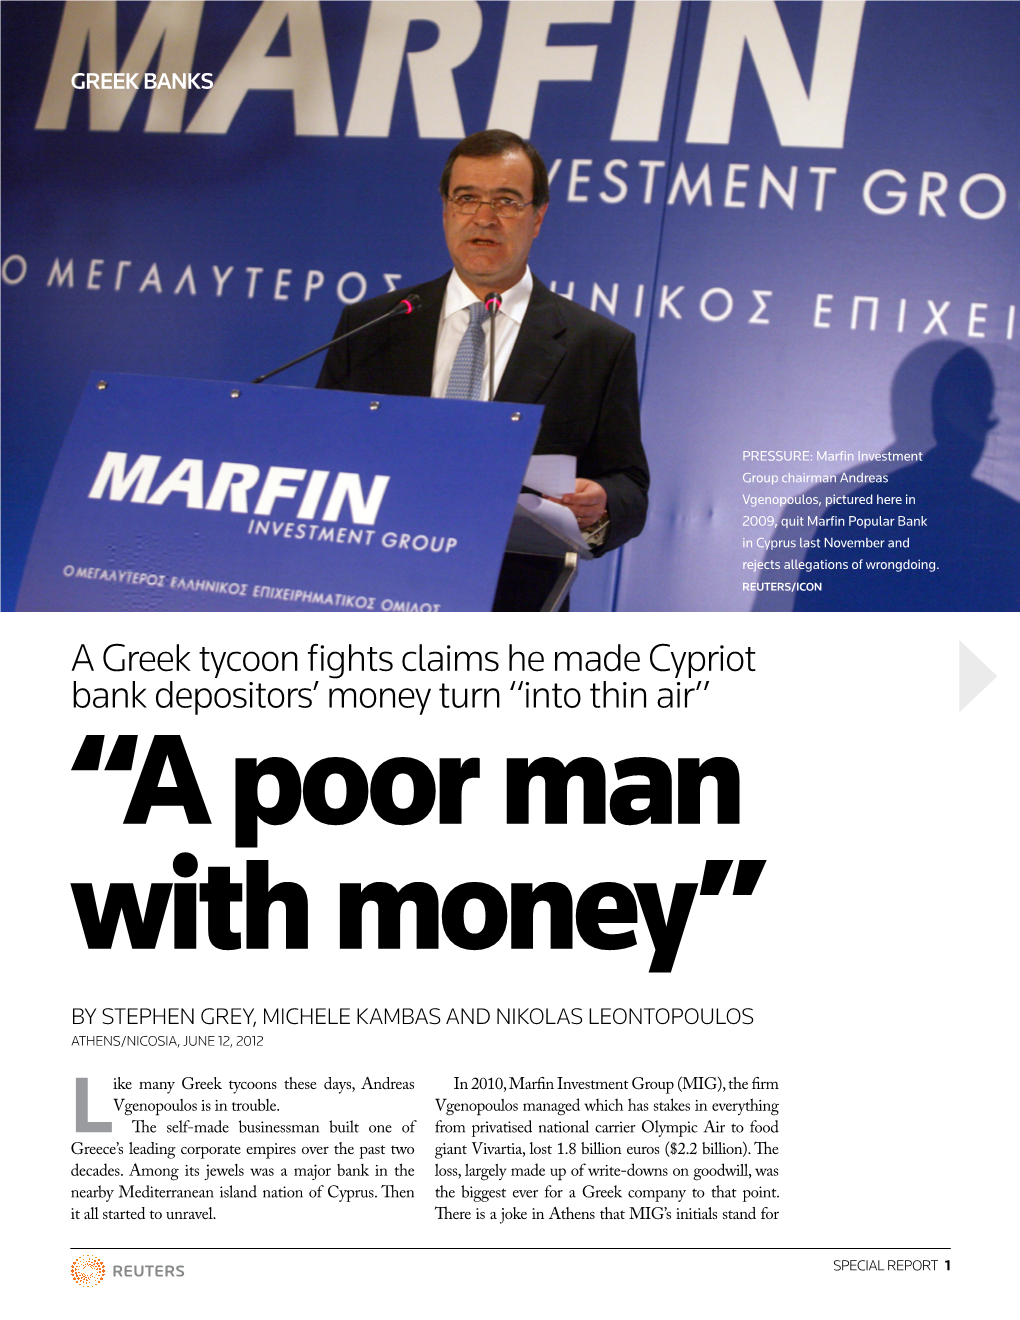 A Greek Tycoon Fights Claims He Made Cypriot Bank Depositors’ Money Turn “Into Thin Air” “A Poor Man with Money”